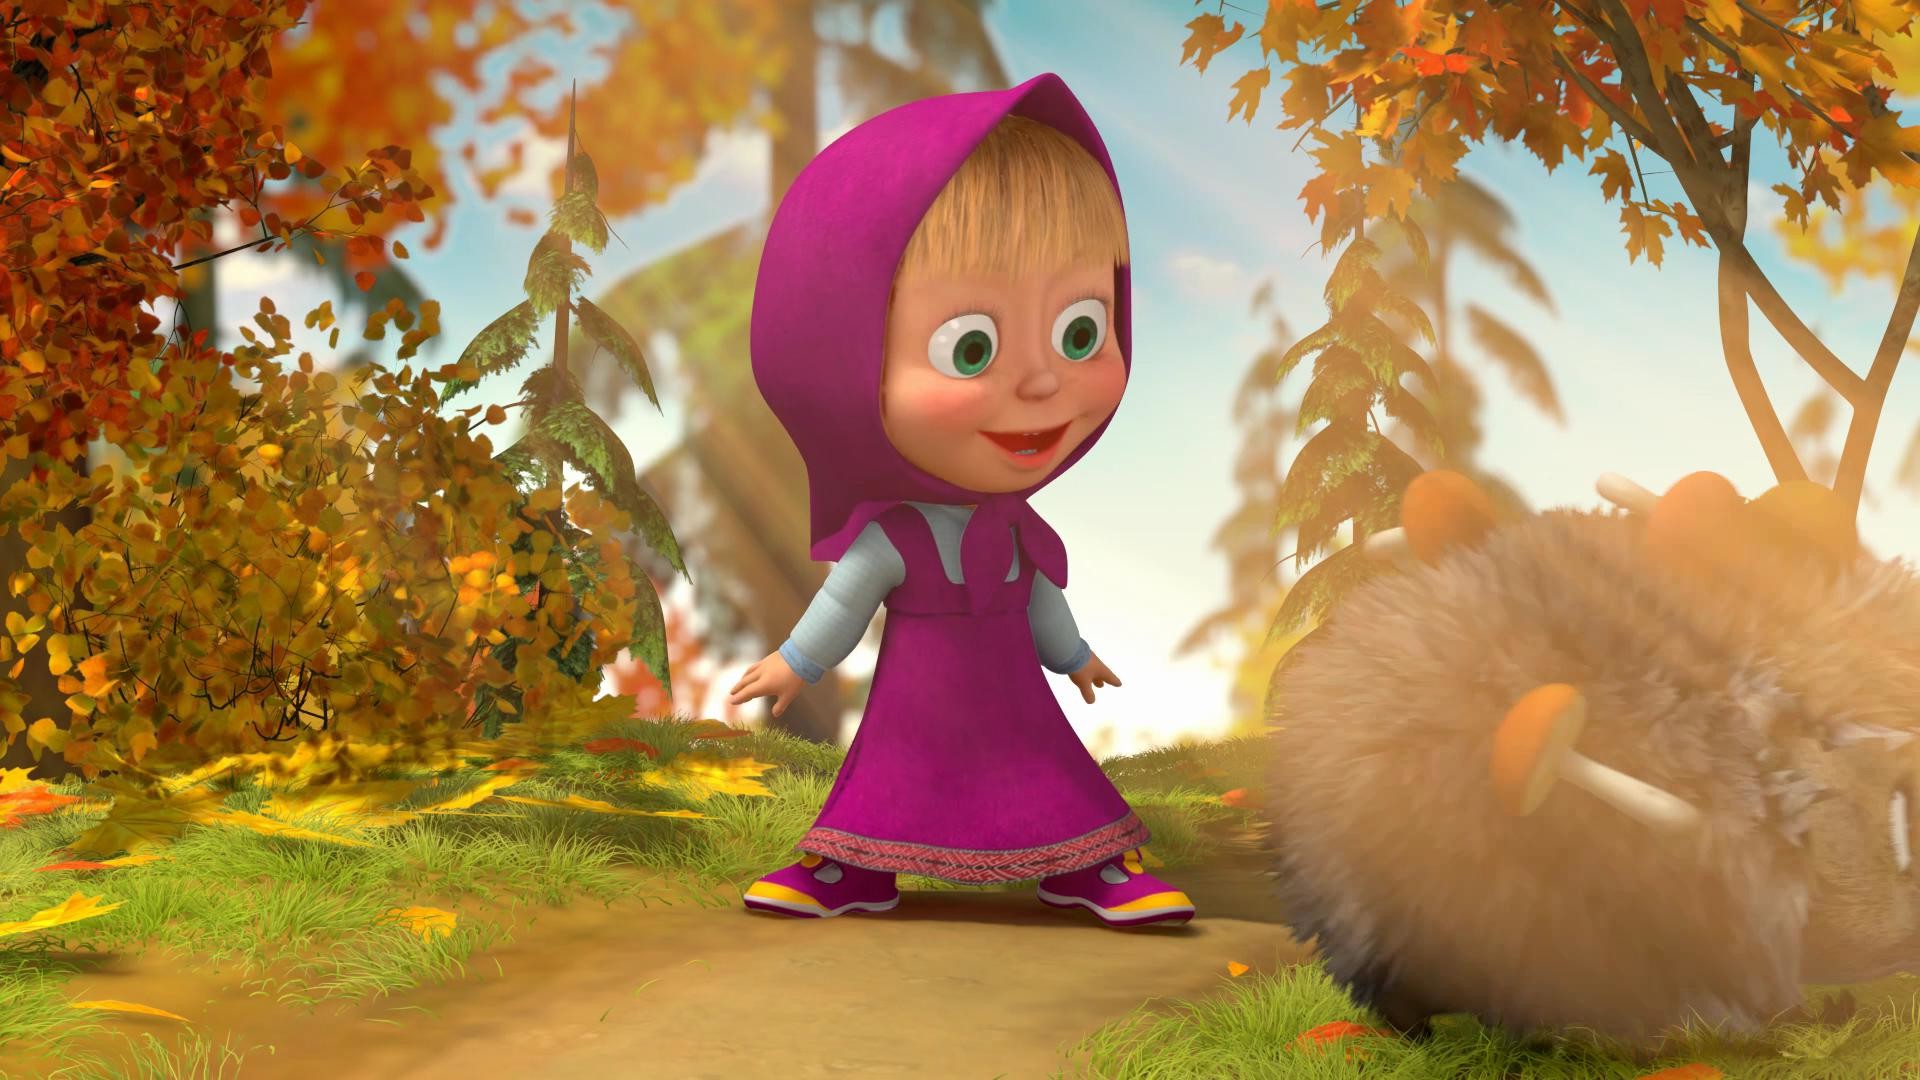 Masha And The Bear Wallpapers 82 Images 64116 Hot Sex Picture 